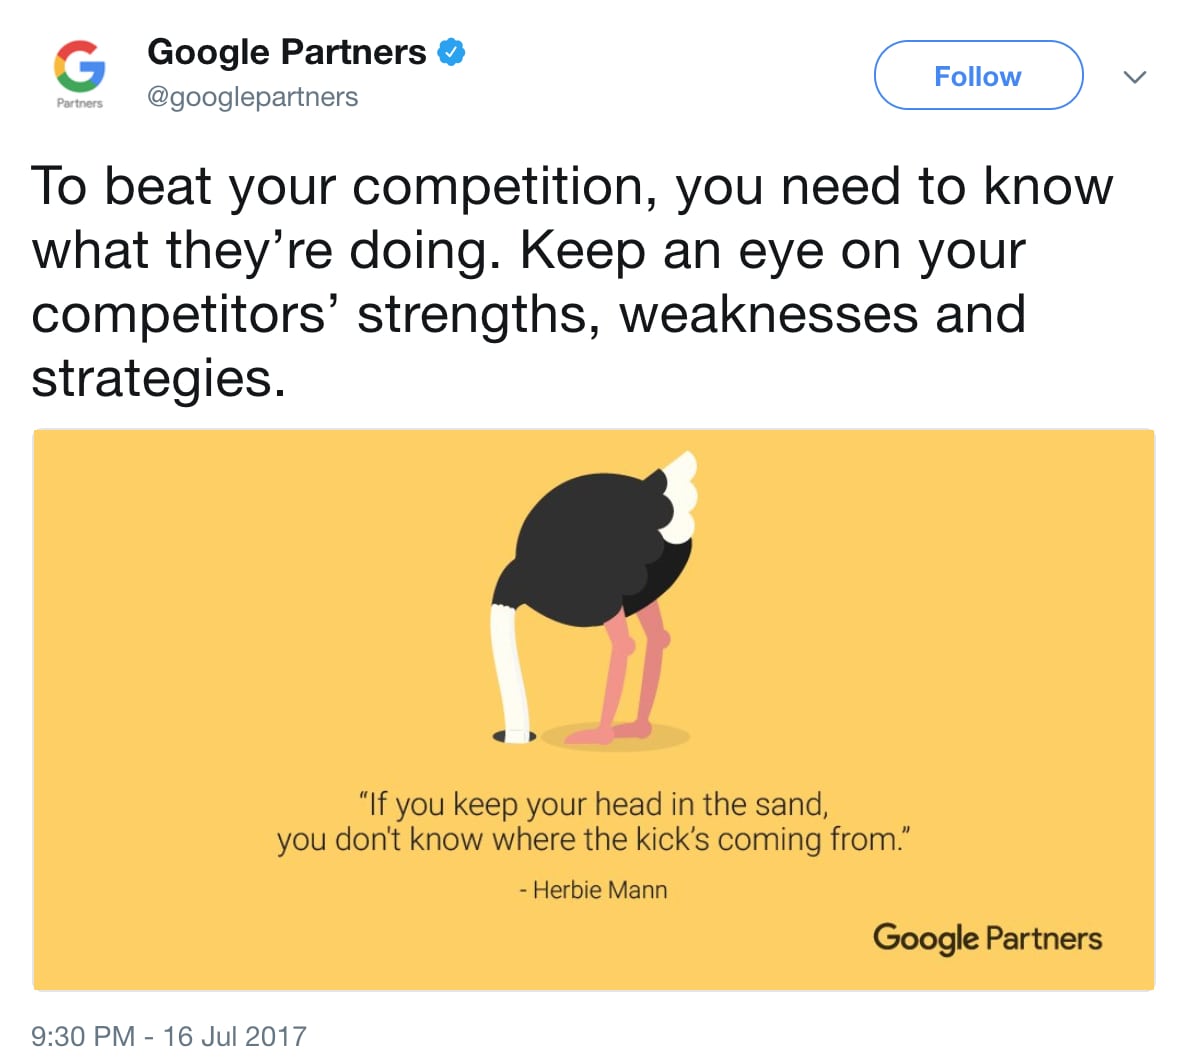 Analyze the strengths and weaknesses of your competitors